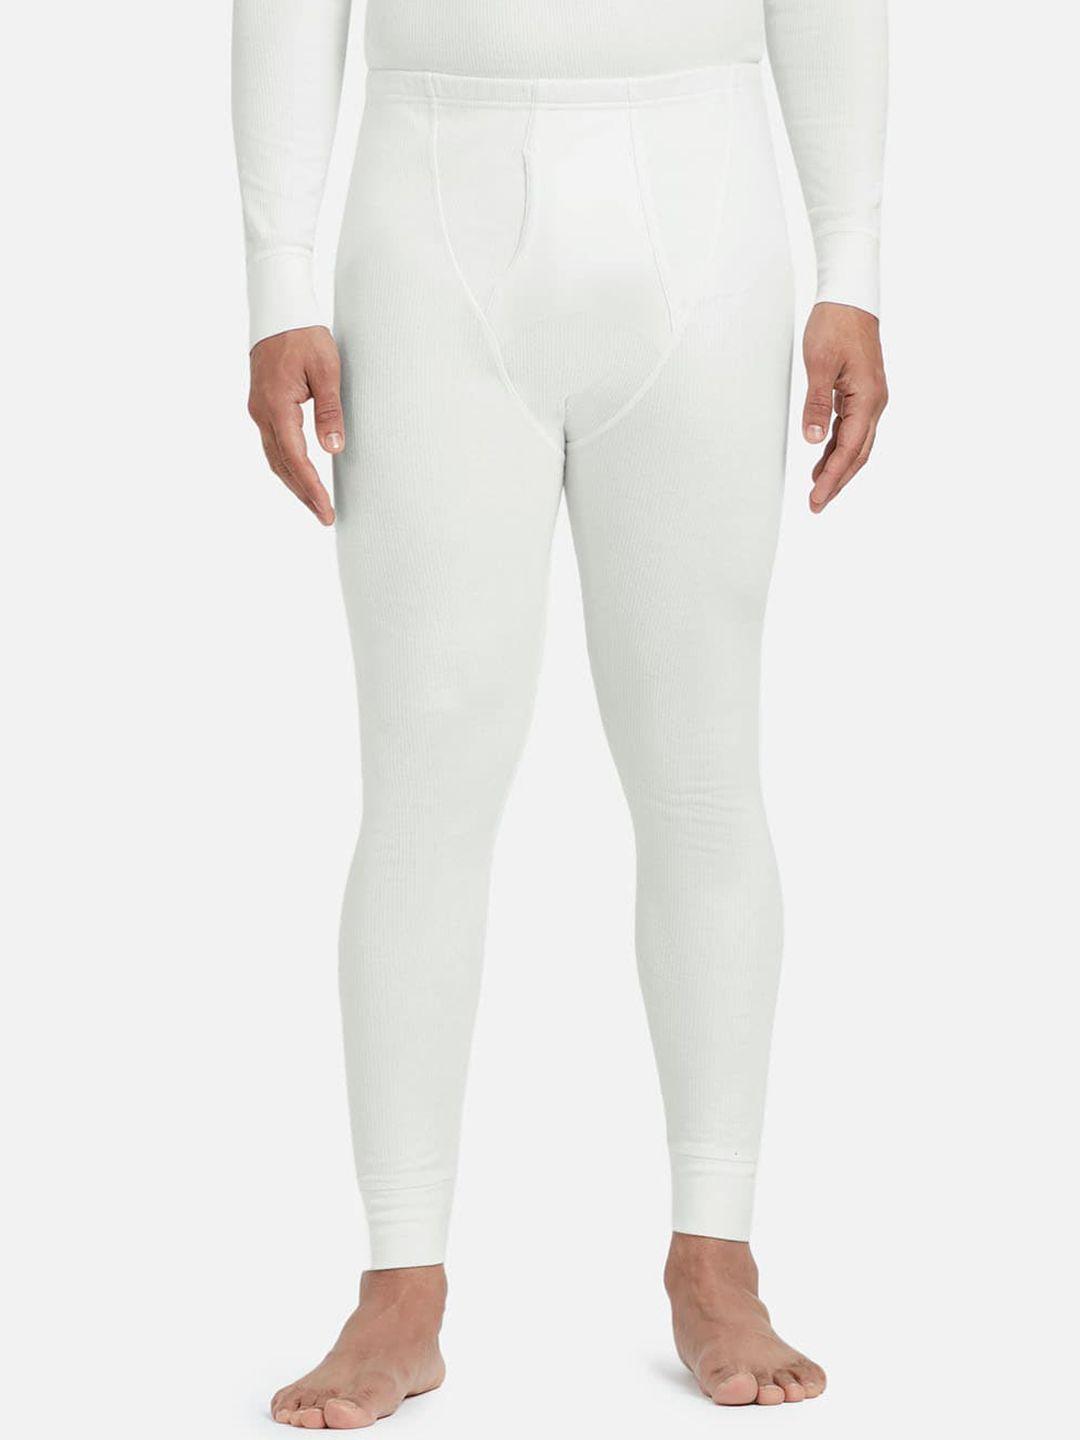 xyxx-men-off-white-solid-antibacterial-thermal-bottoms